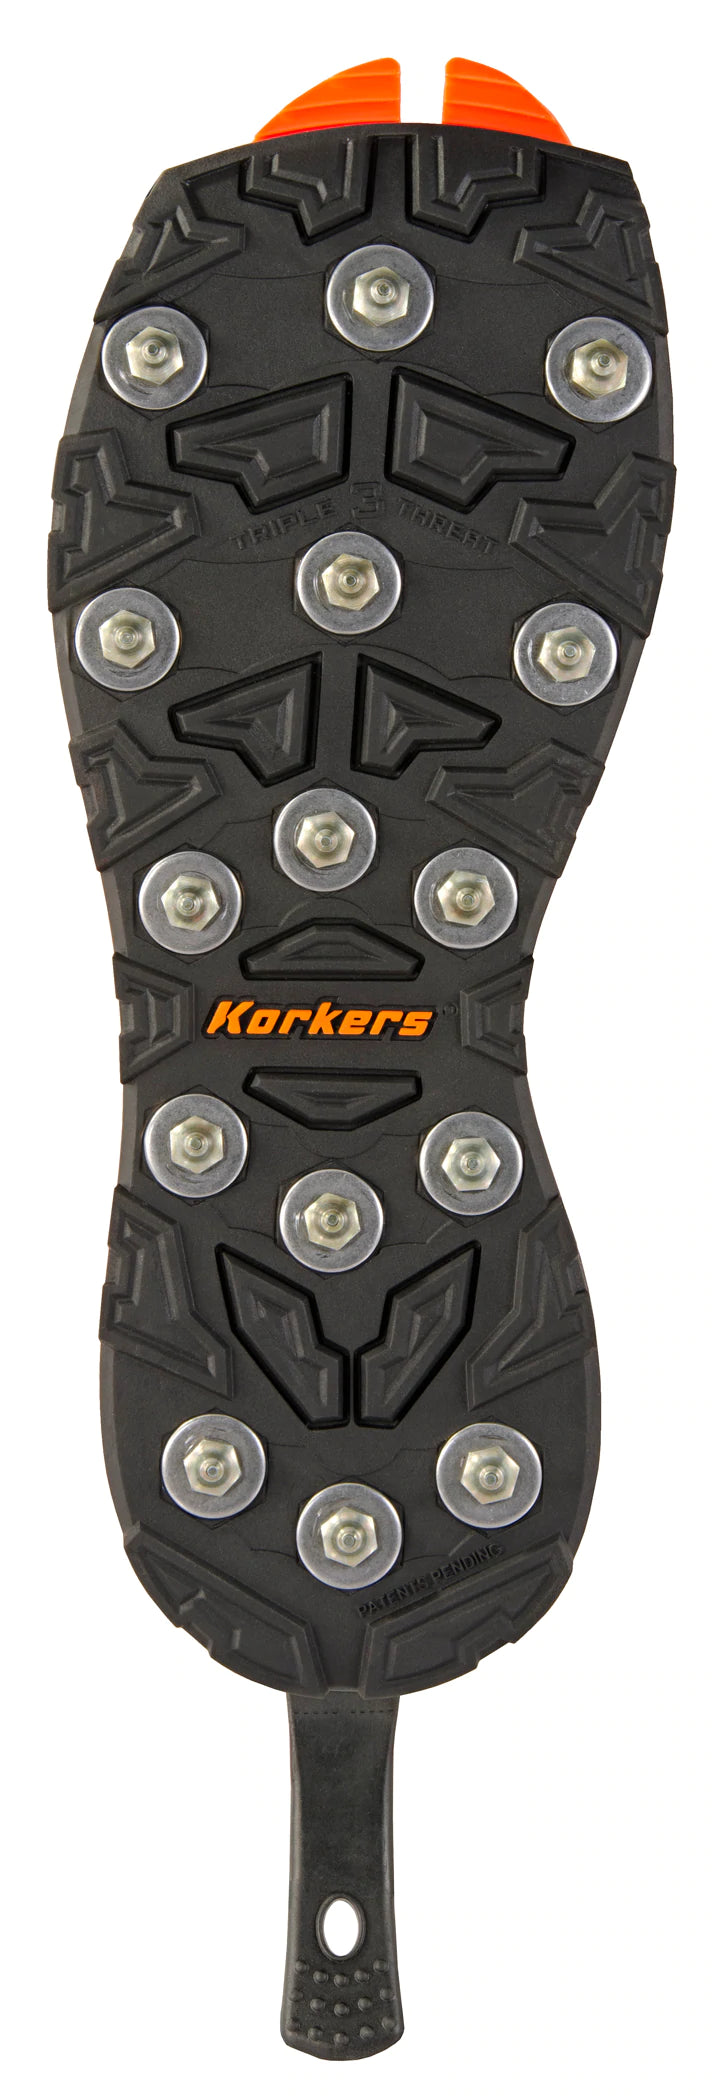 Korkers OmniTrax 3.0 Fishing Sole - Triple Threat with Carbide Spikes - Black/Orange